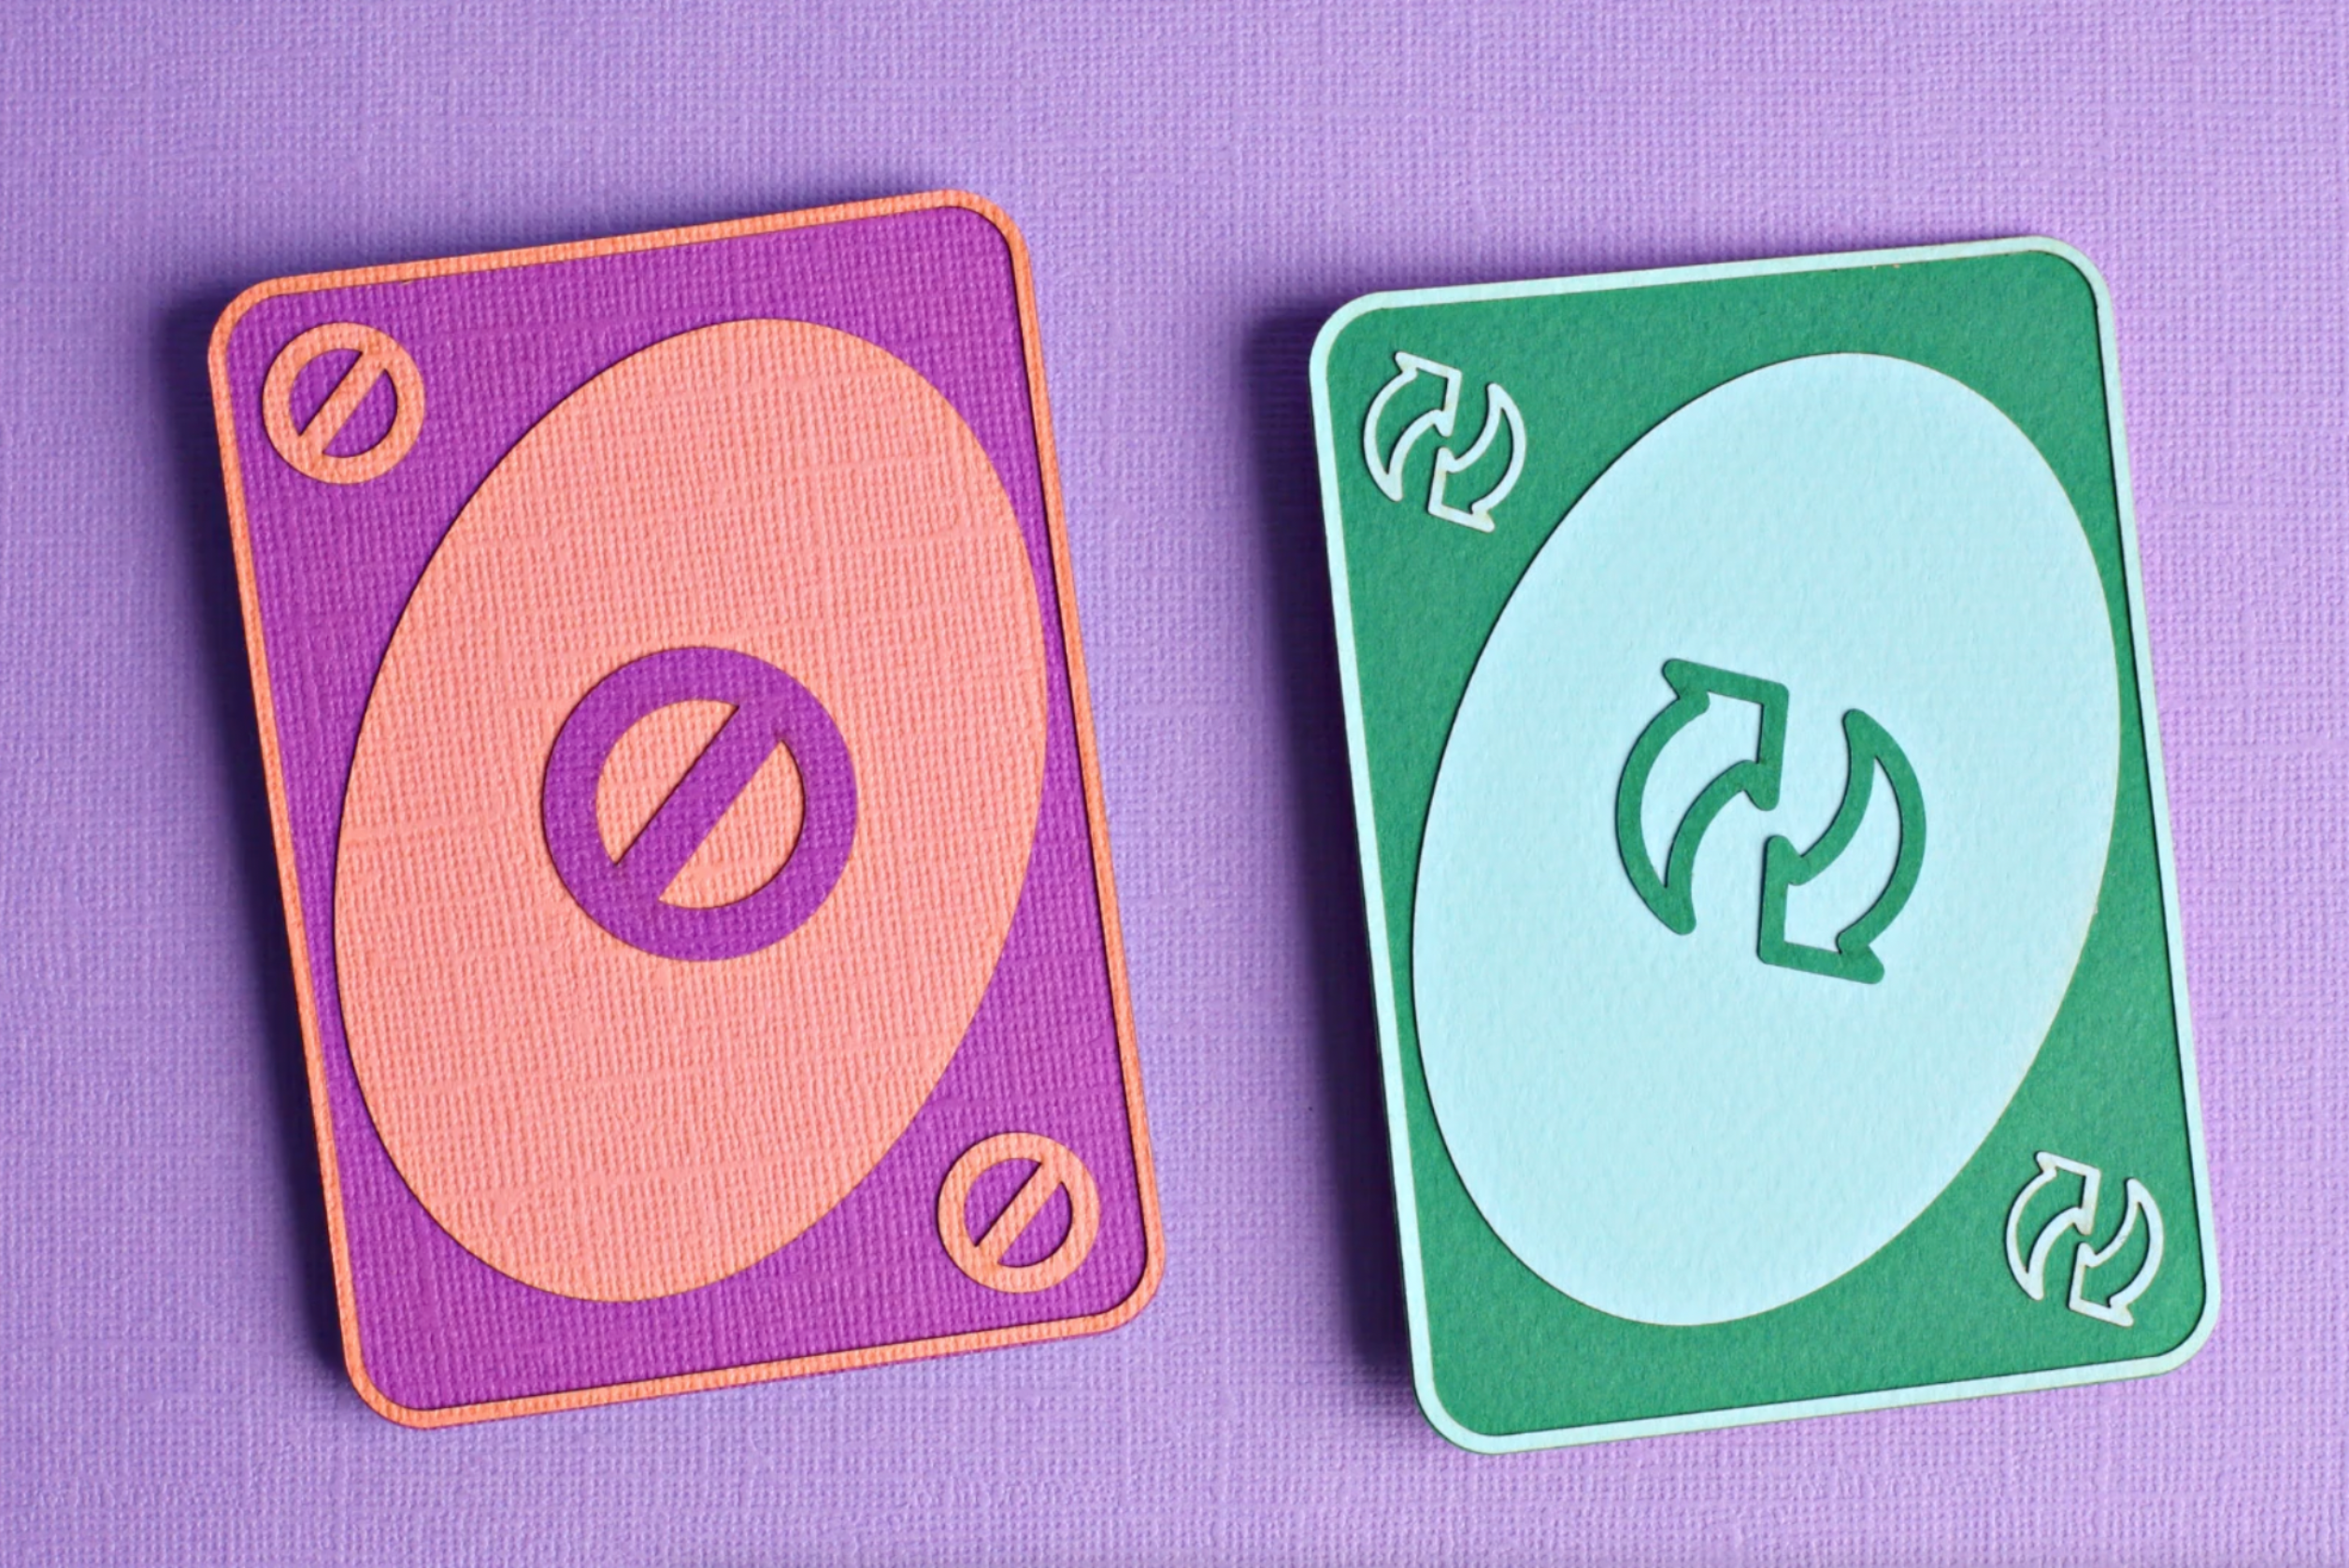 Two uno cards represent the difference between a receding hairline and a maturing hairline